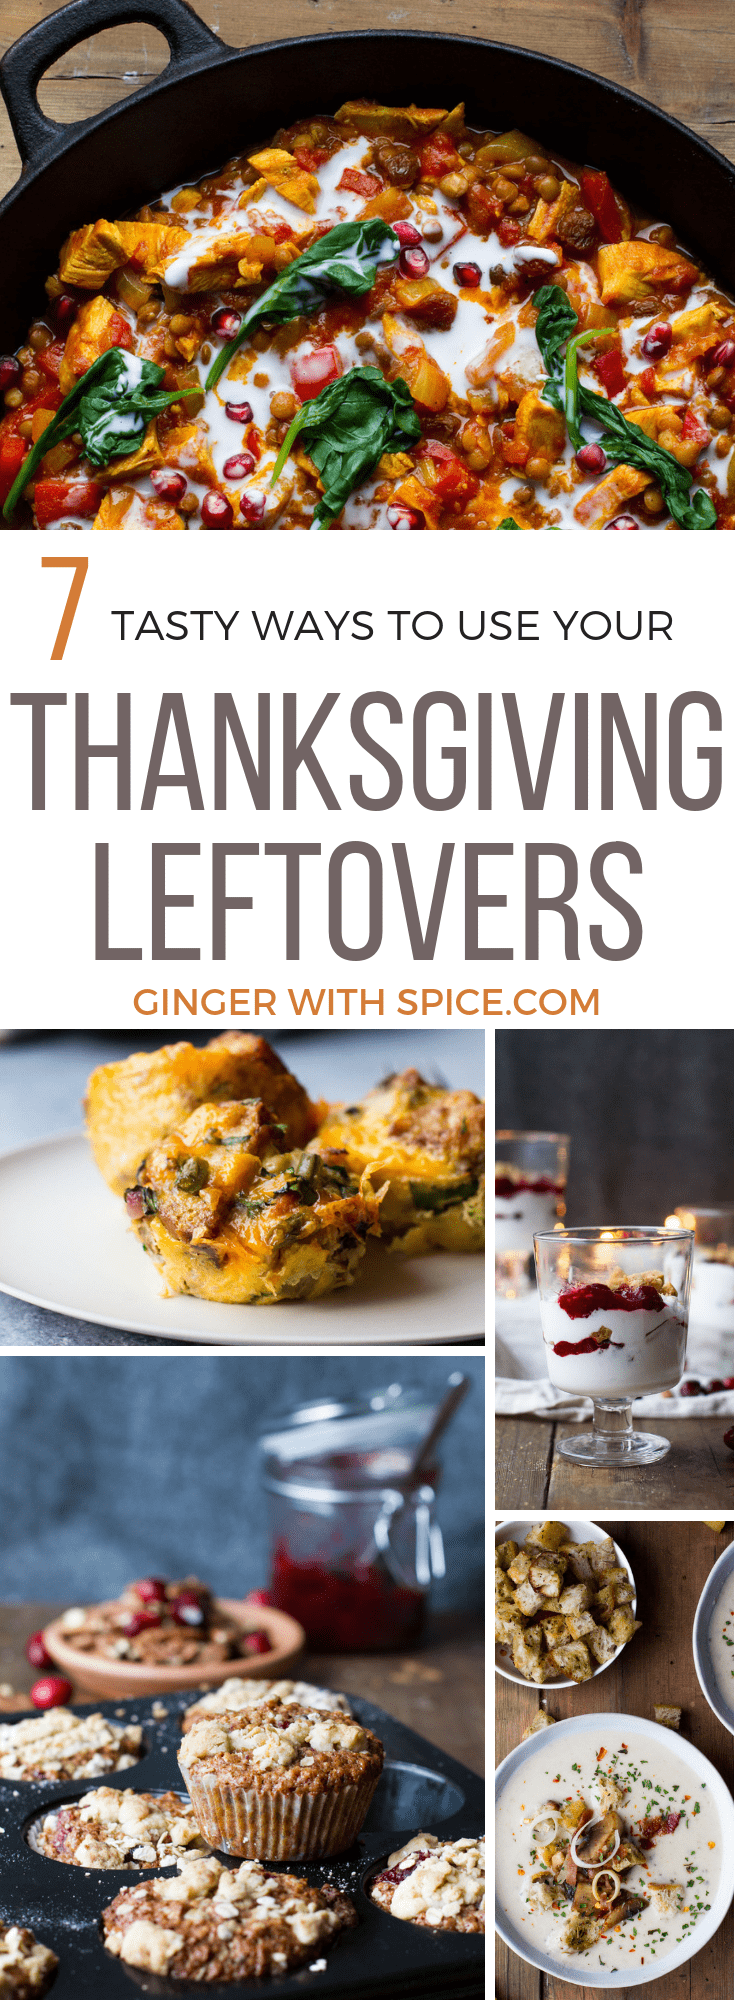 7 Tasty Ways to Use Your Thanksgiving Leftovers